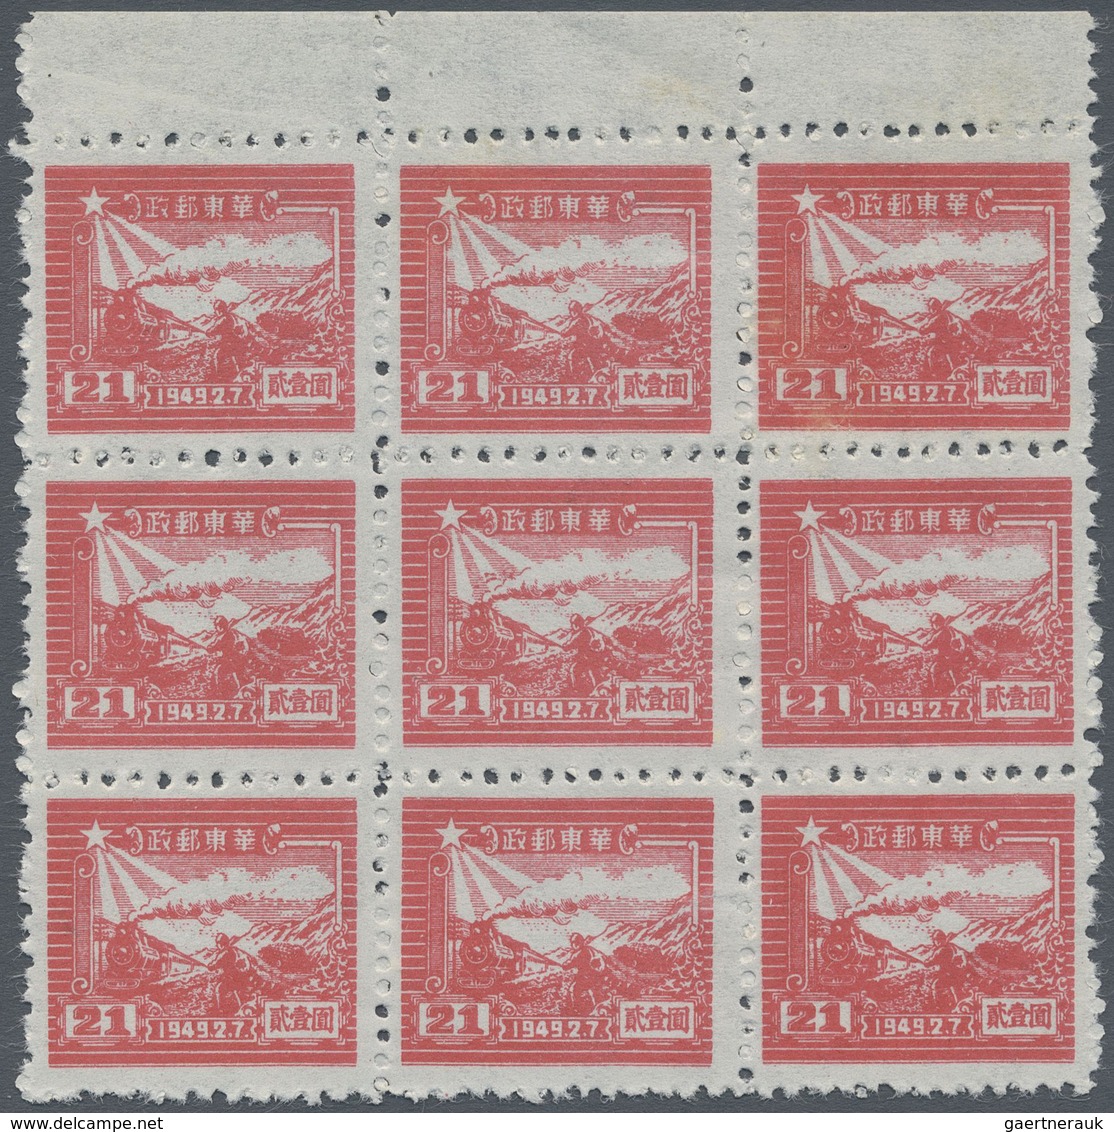 (*)/O/ China - Volksrepublik - Provinzen: East China, 1946/49, unused no gum as issued or used accumulation